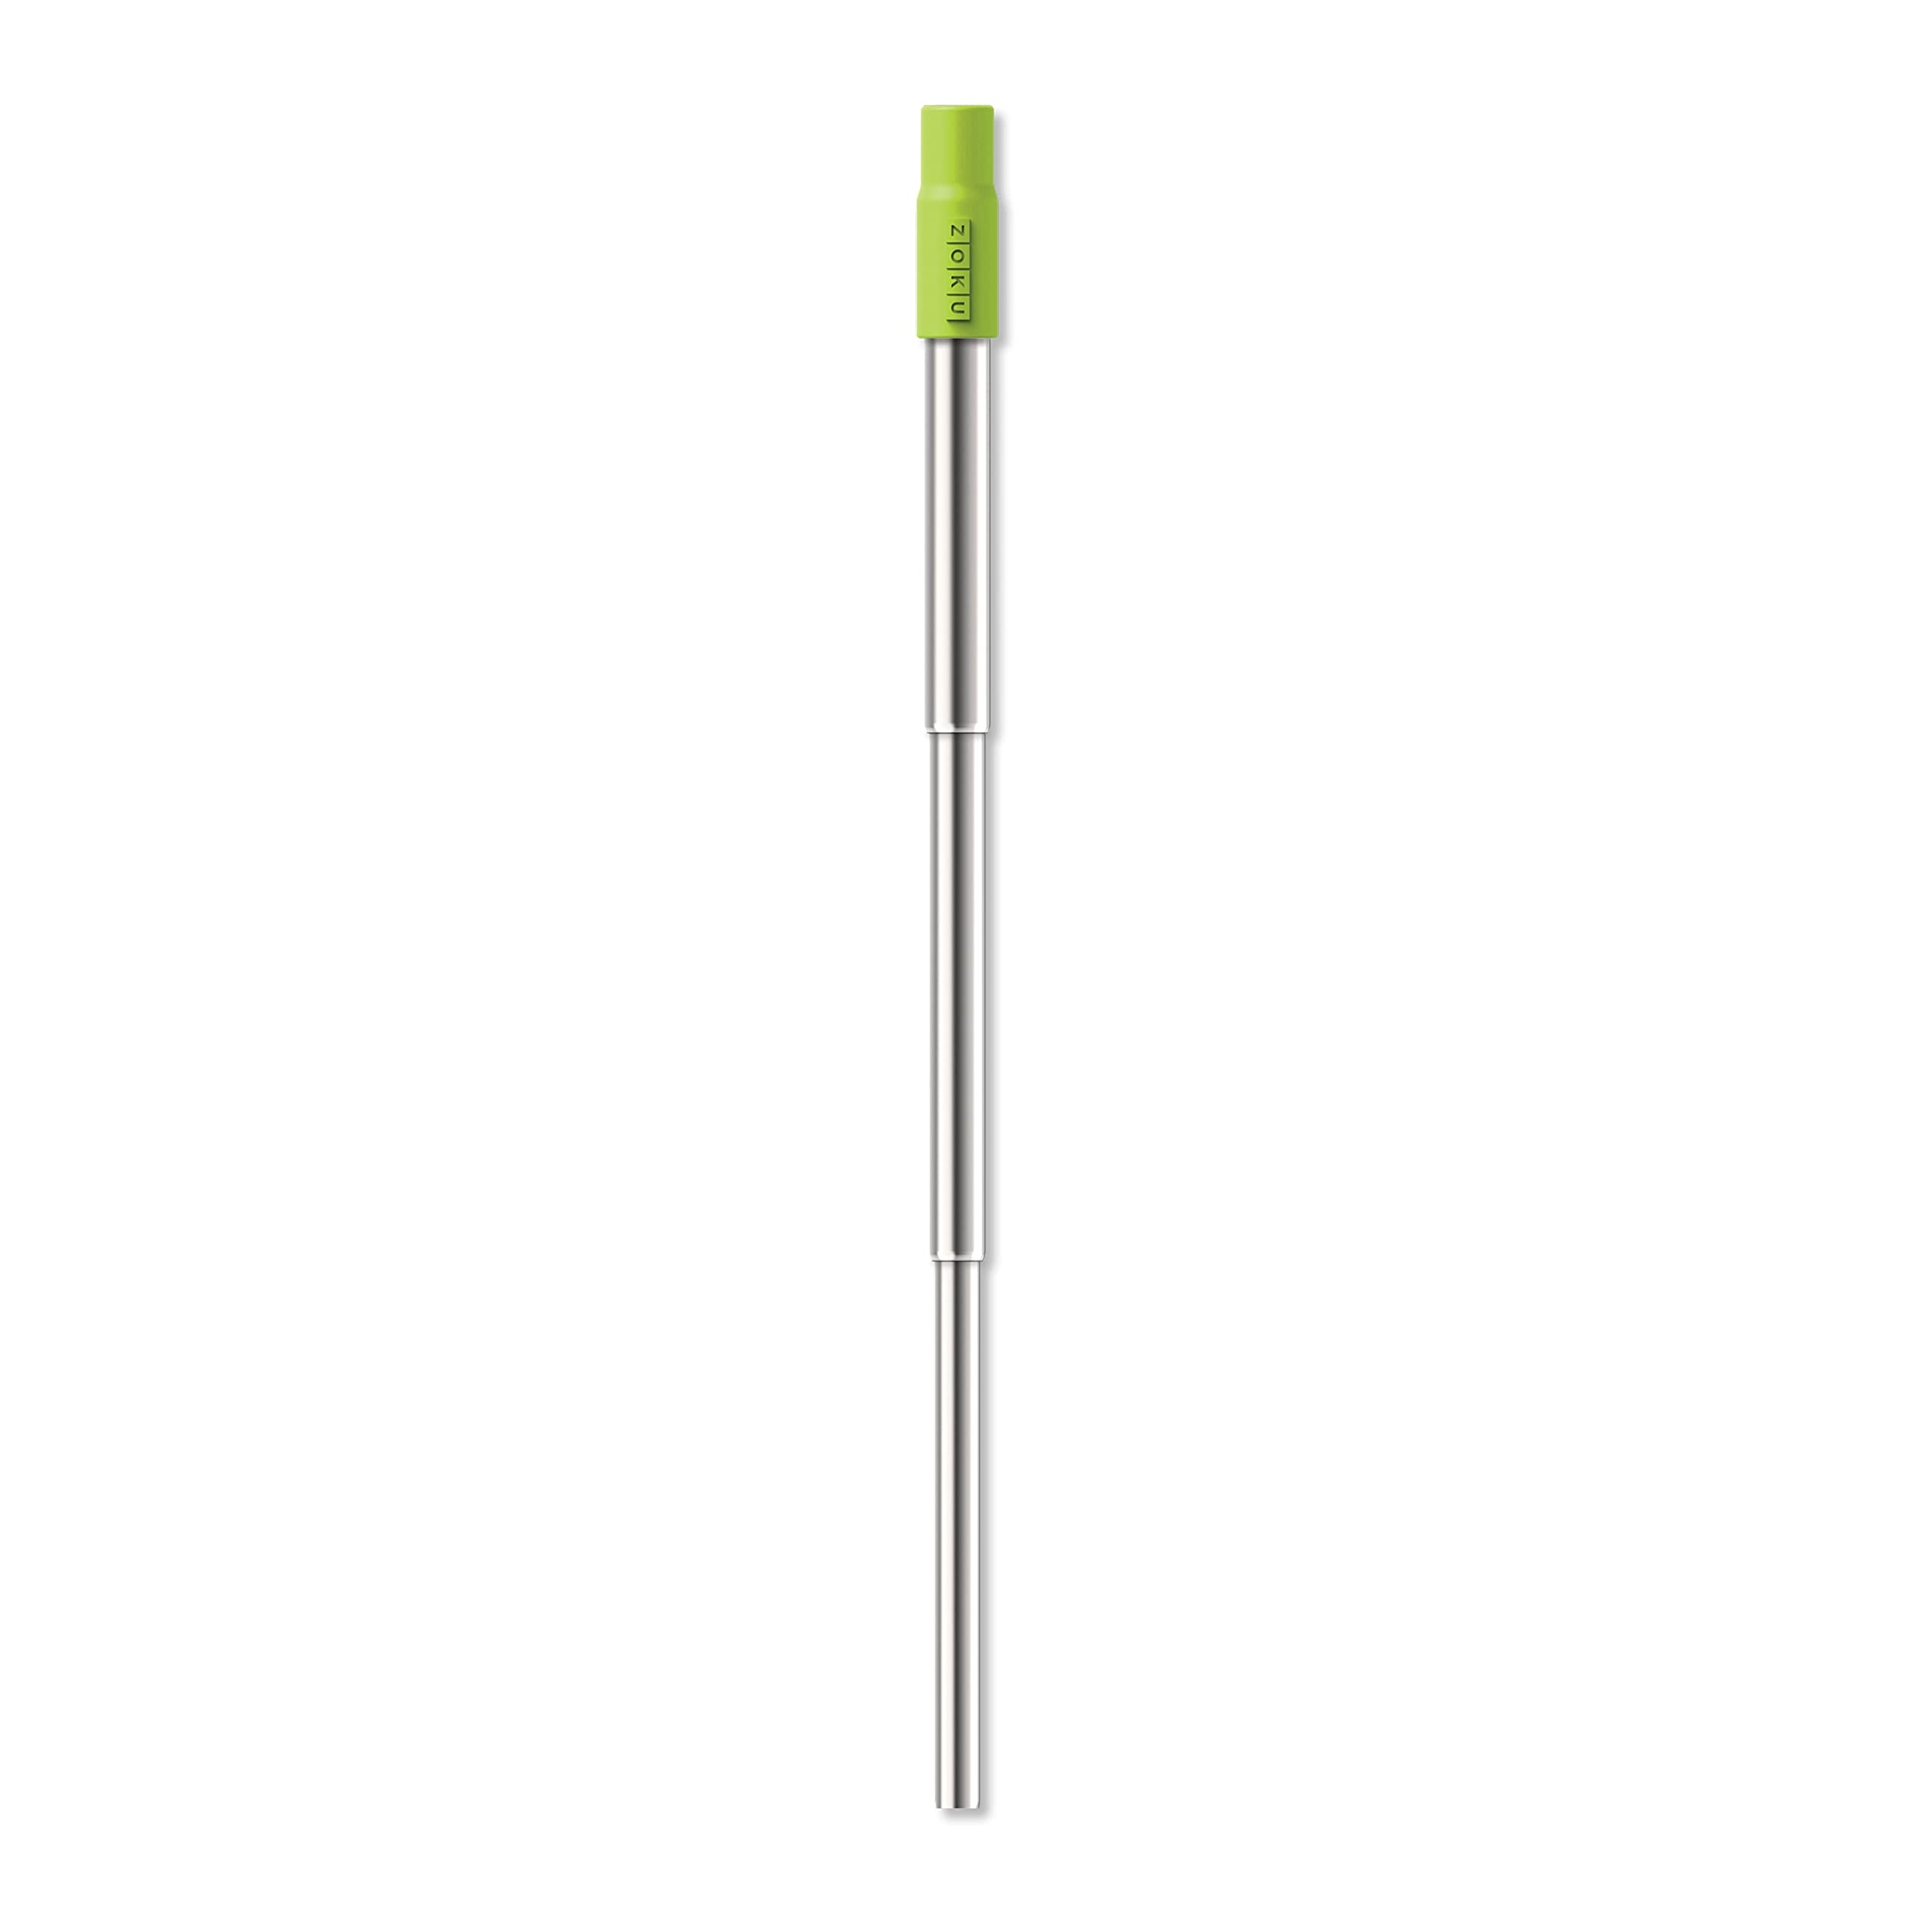 Zoku Reusable Pocket Straw, Telescopic Stainless Steel Drinking Straw with Silicone Mouthpiece, Adjustable to 9 Inches, Teal